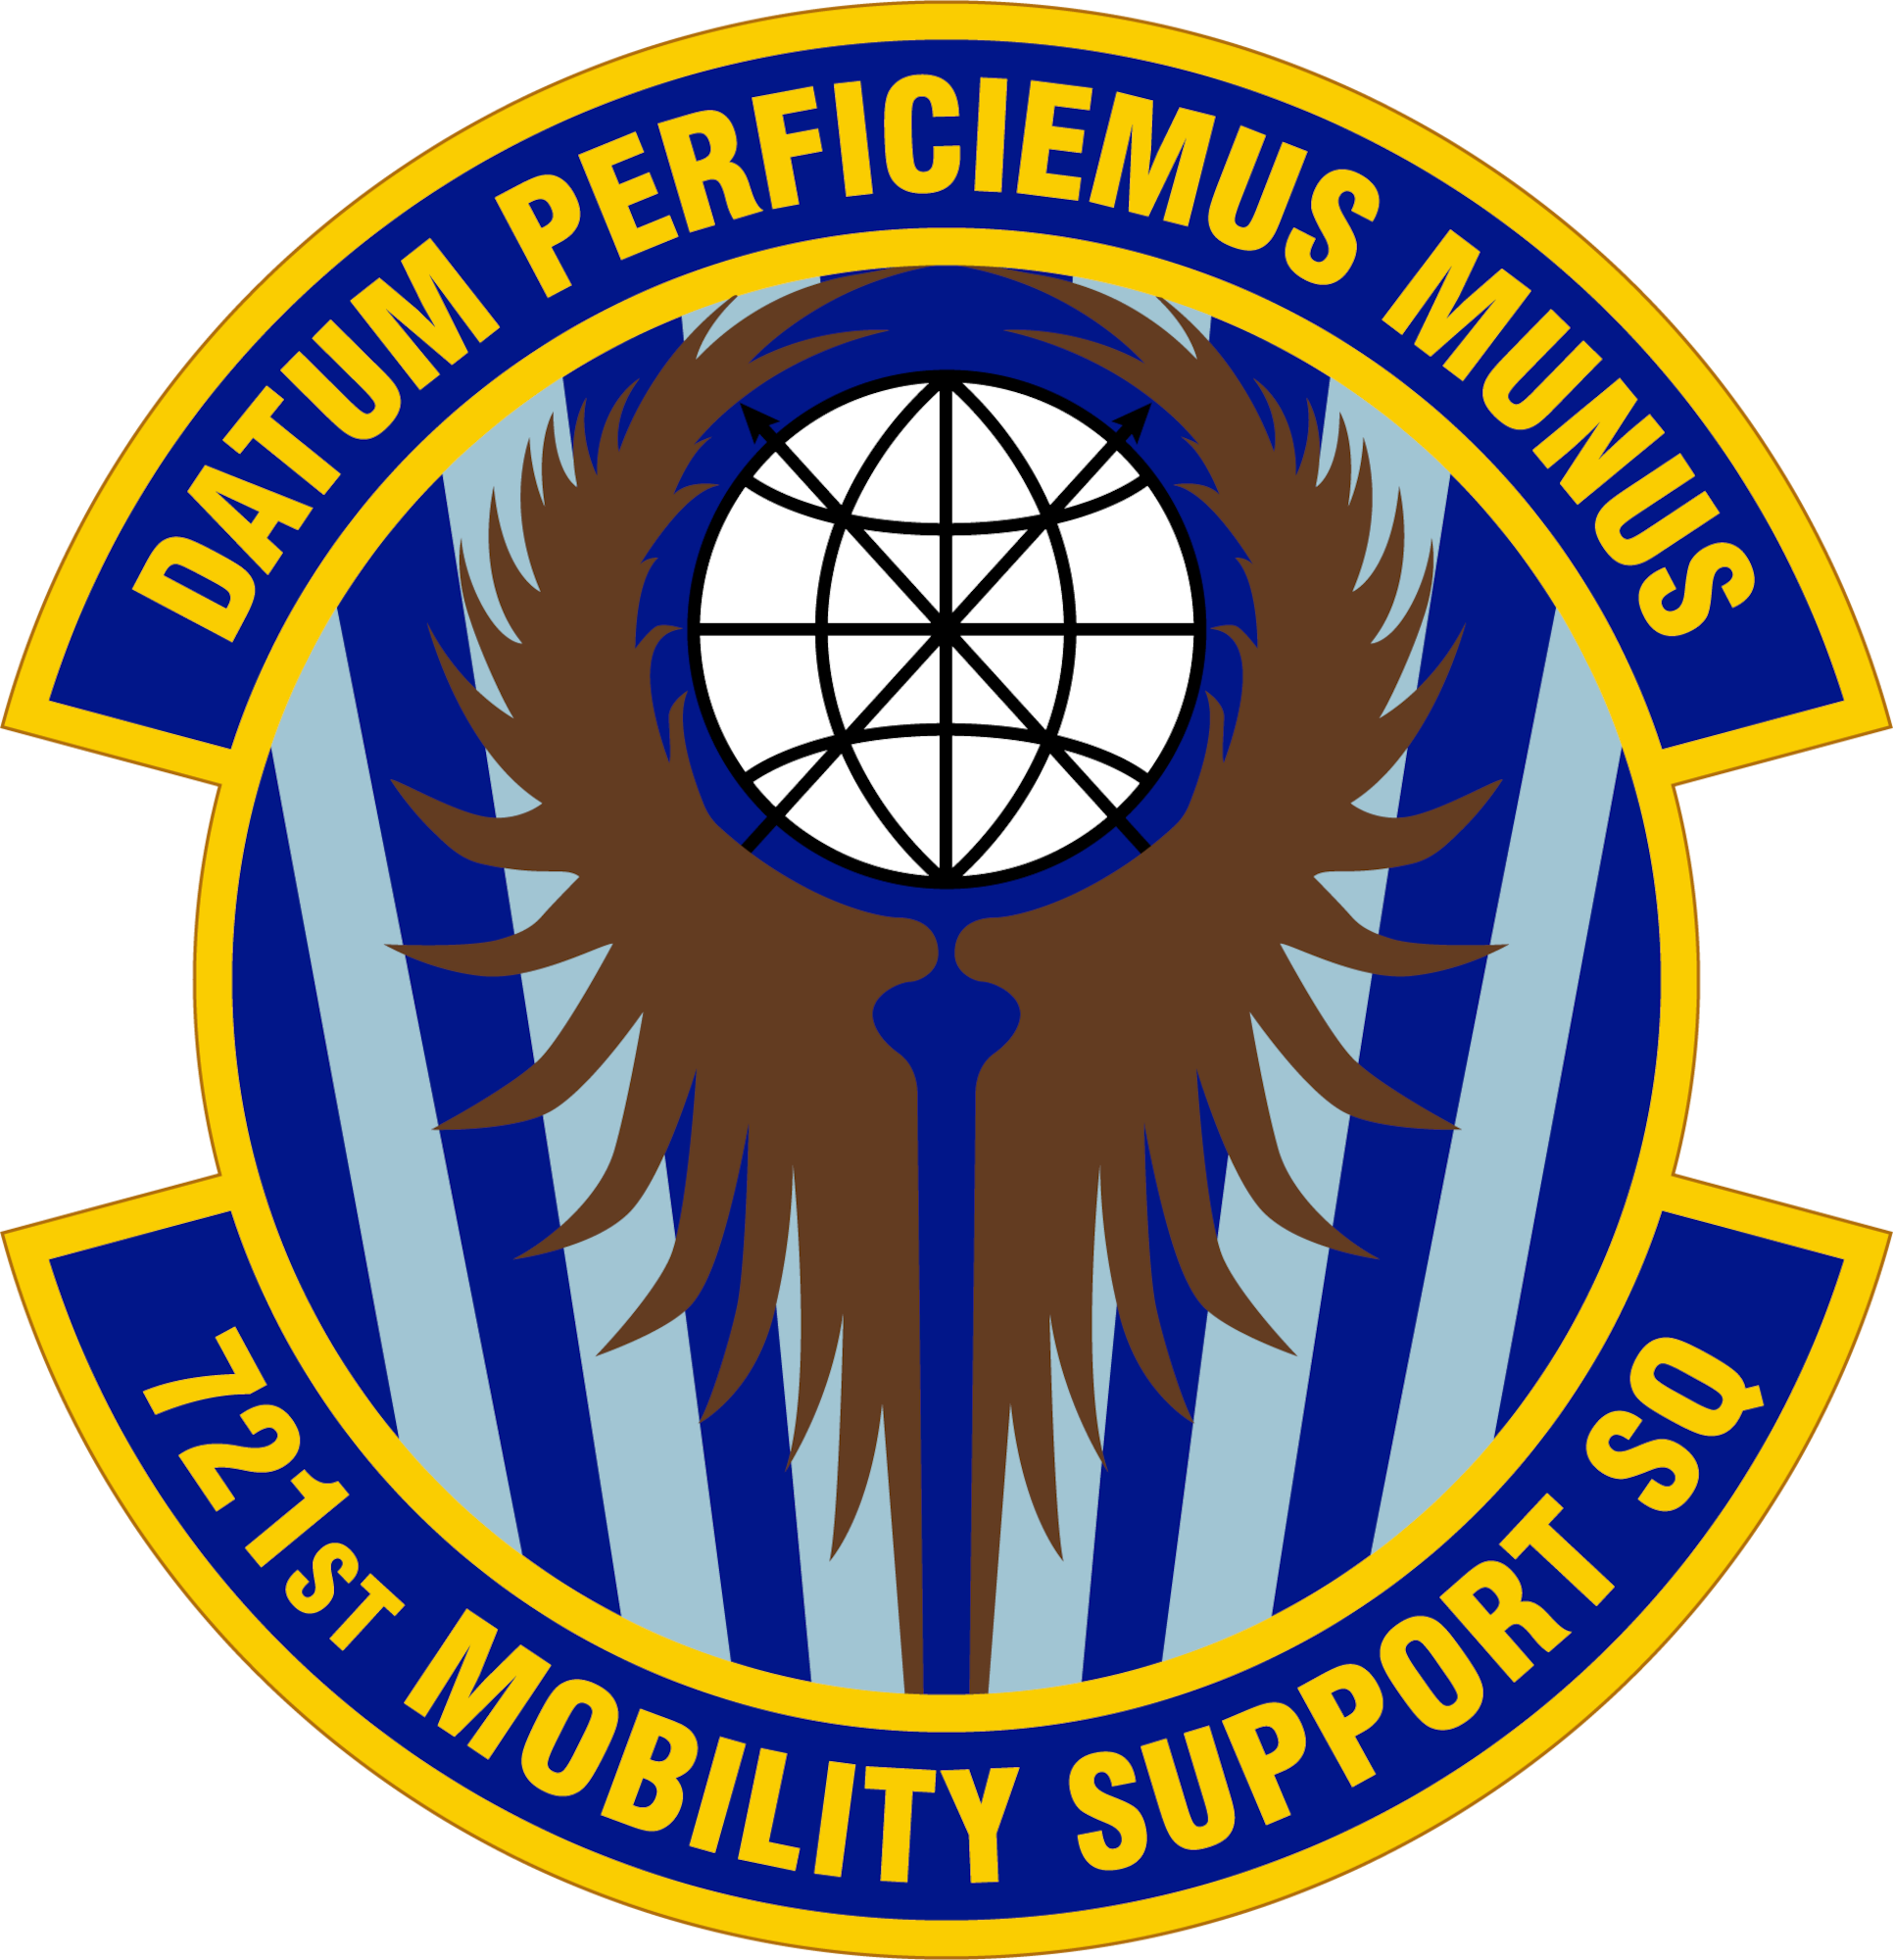 721st Mobility Support Squadron Shield